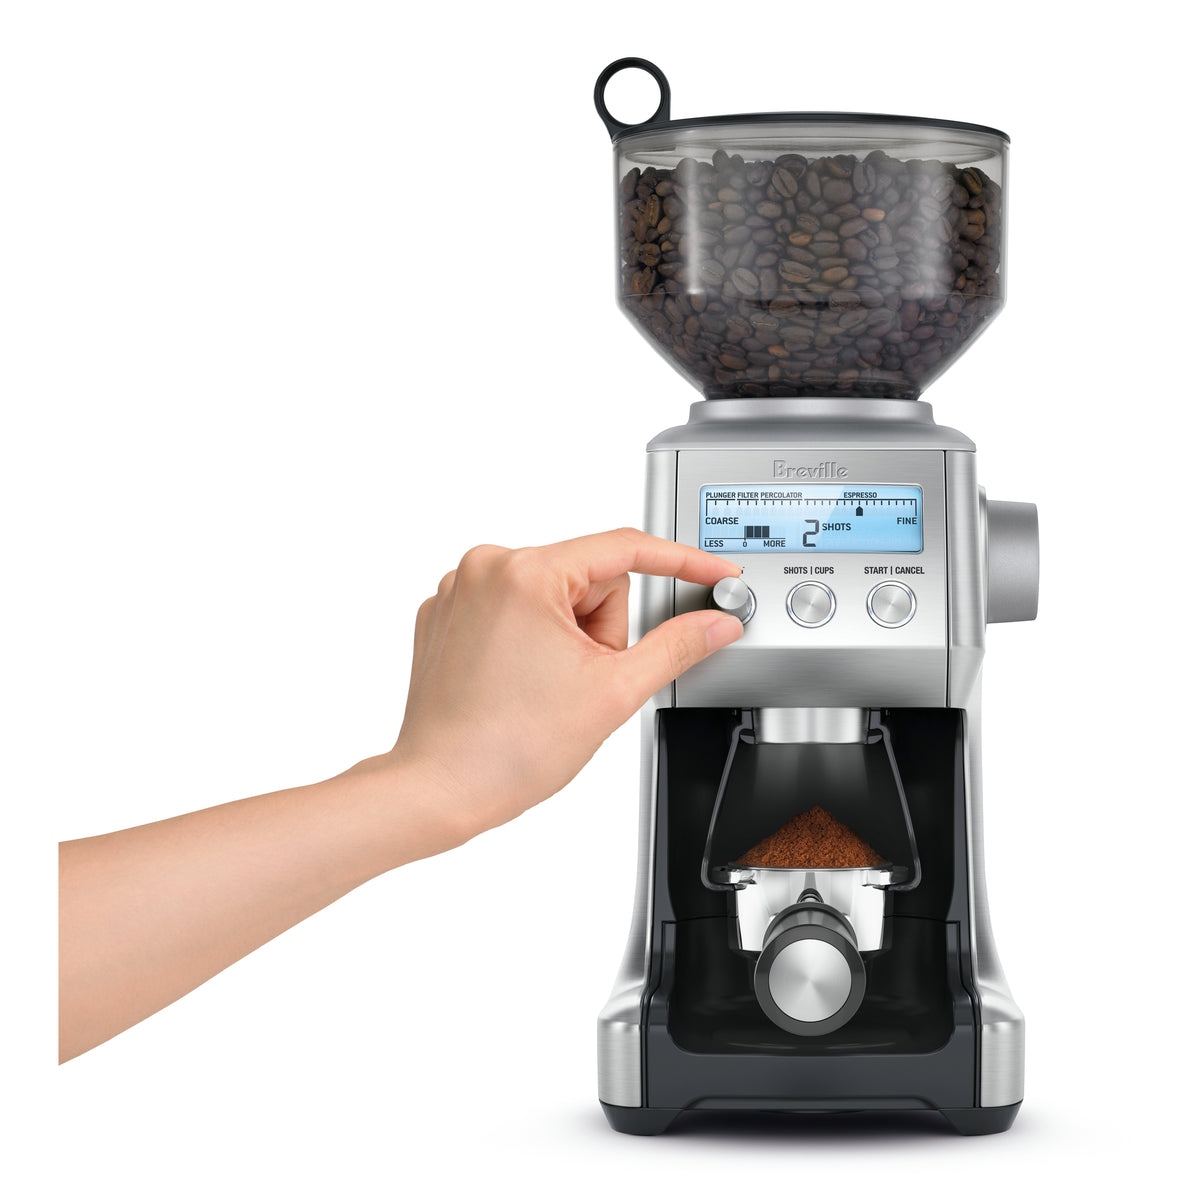 Breville Smart Grinder Pro Black Truffle Available at Espresso Canada Lifestyle